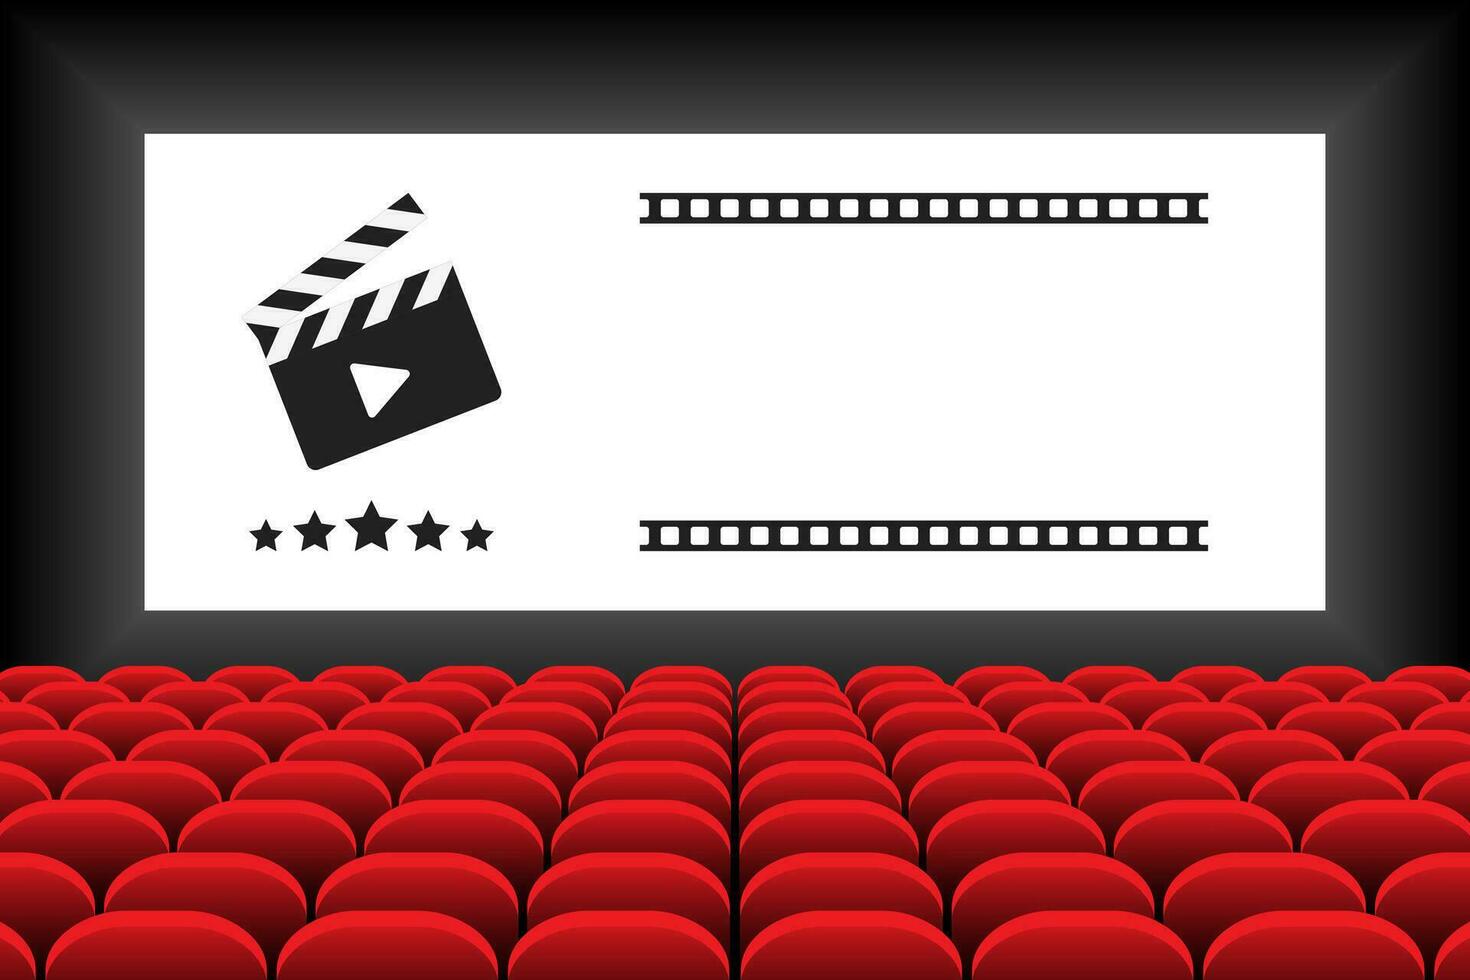 Cinema movie theater with screen and red seat, vector illustration